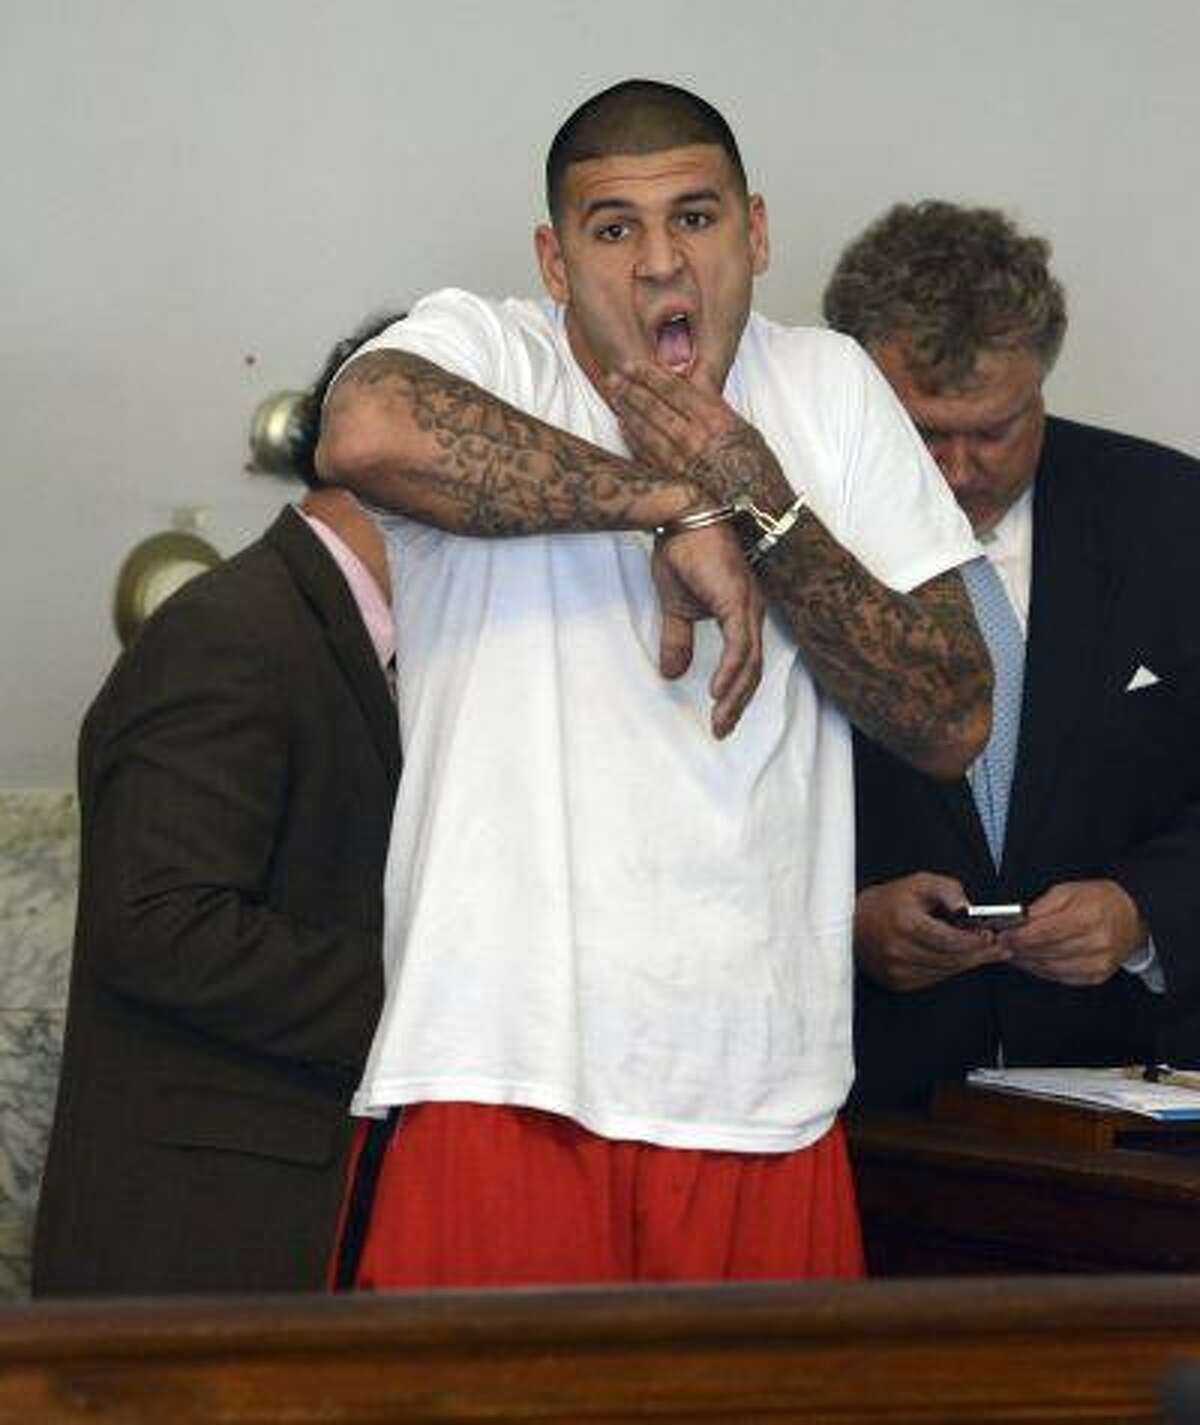 Former New England Patriots tight end Aaron Hernandez, left, stands with his attorney Michael Fee, right, during arraignment in Attleboro District Court Wednesday, June 26, in Attleboro, Mass. Hernandez was charged with murdering Odin Lloyd, a 27-year-old semi-pro football player for the Boston Bandits, whose body was found June 17 in an industrial park in North Attleborough, Mass.